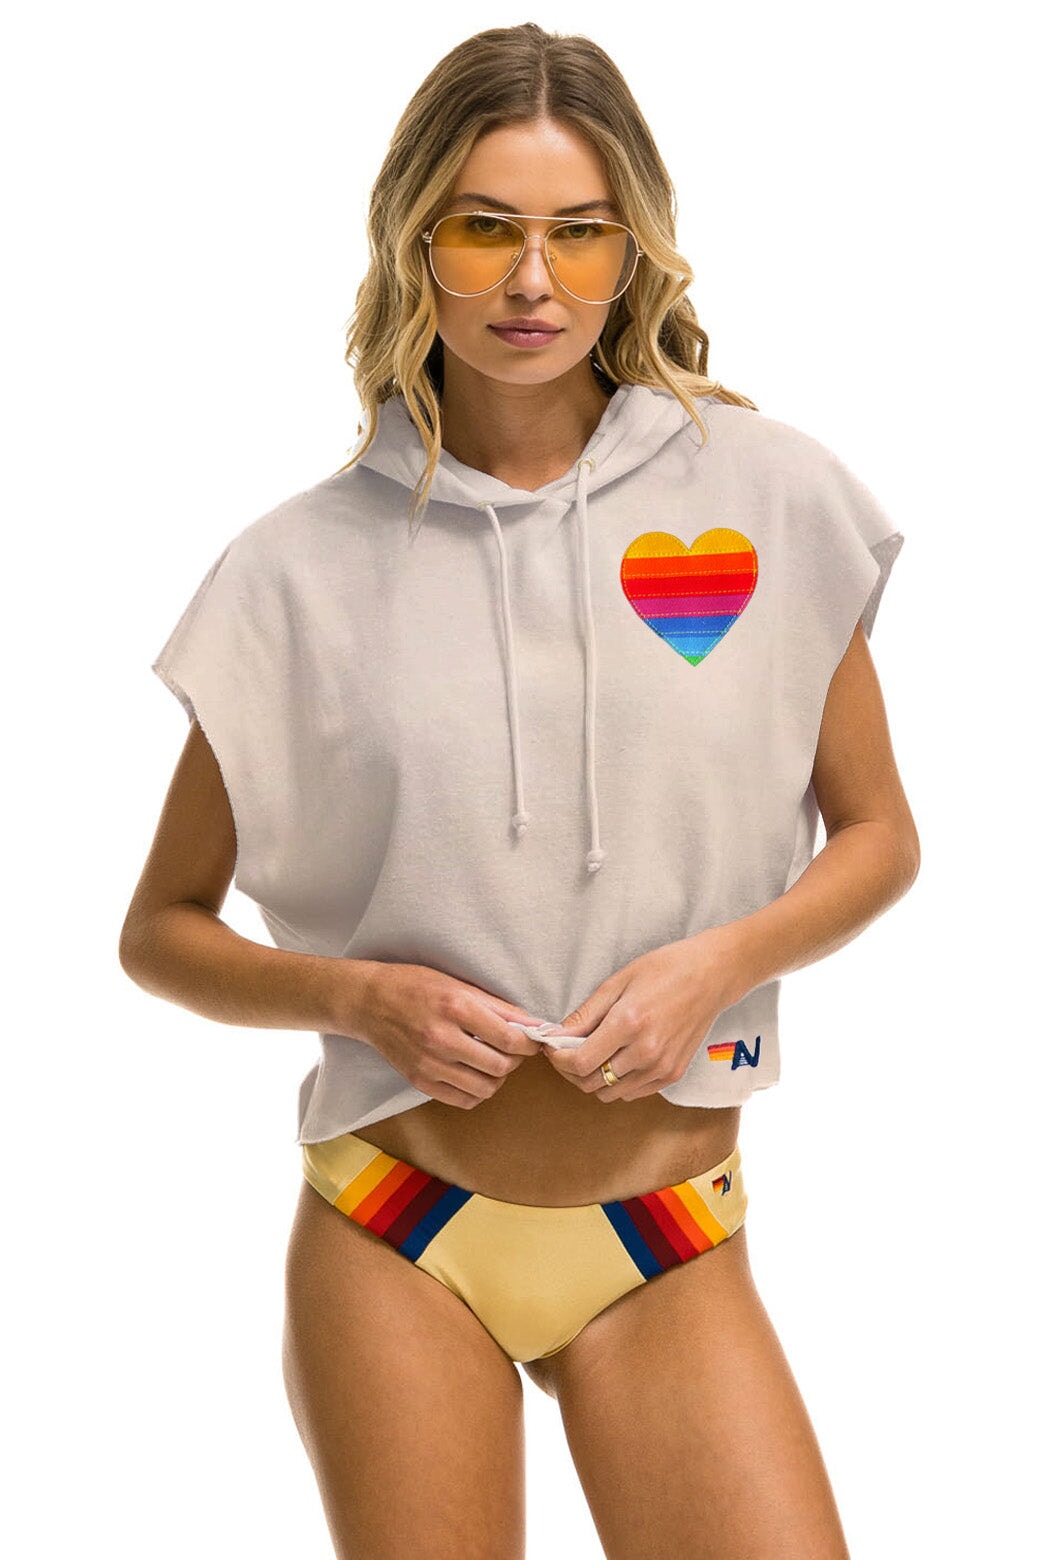 RAINBOW HEART STITCH SLEEVELESS RELAXED CROPPED PULLOVER HOODIE - SAND Hoodie Aviator Nation 